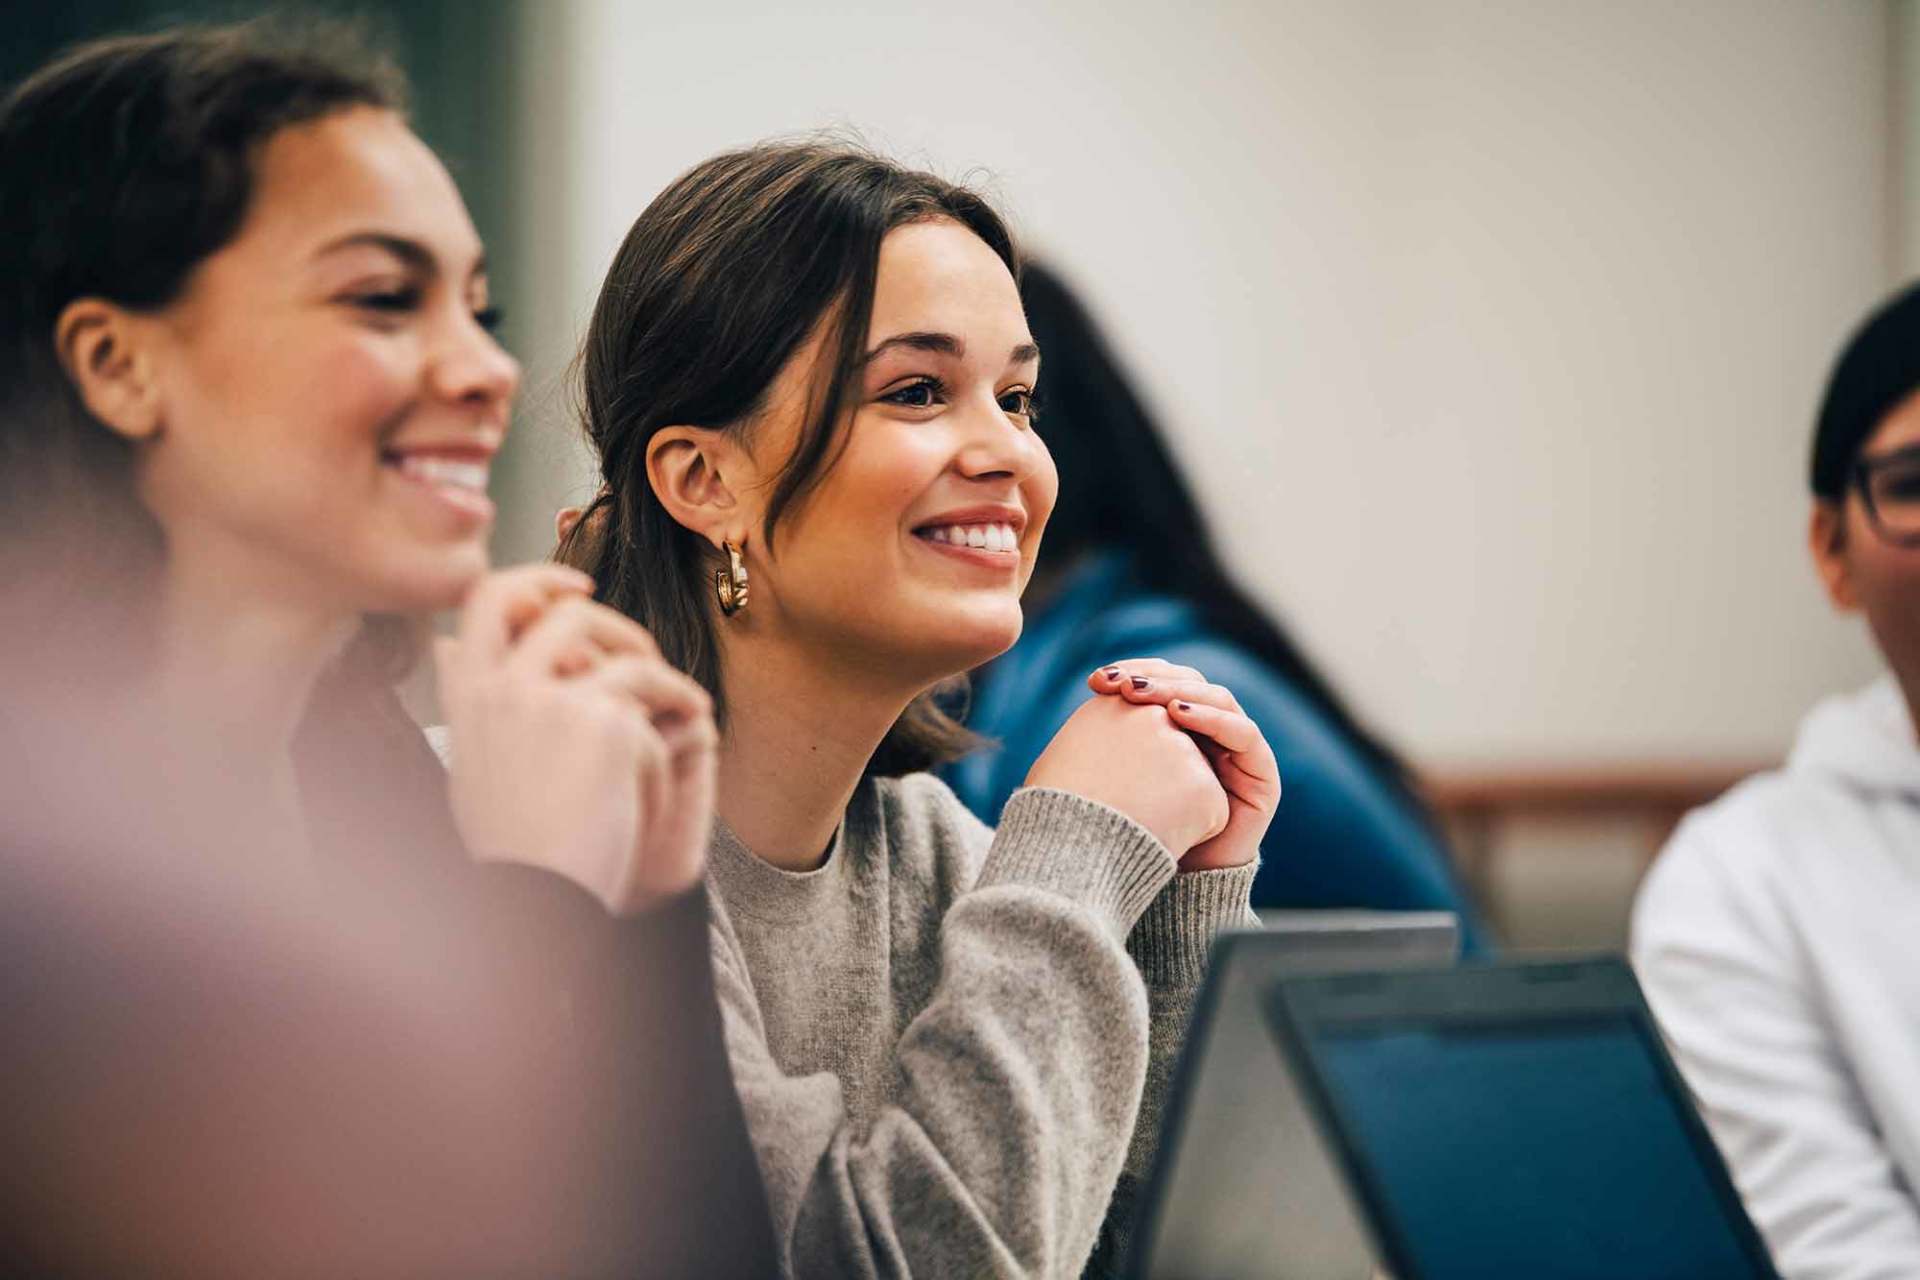 Smiling female students looking away while sitting in classroom